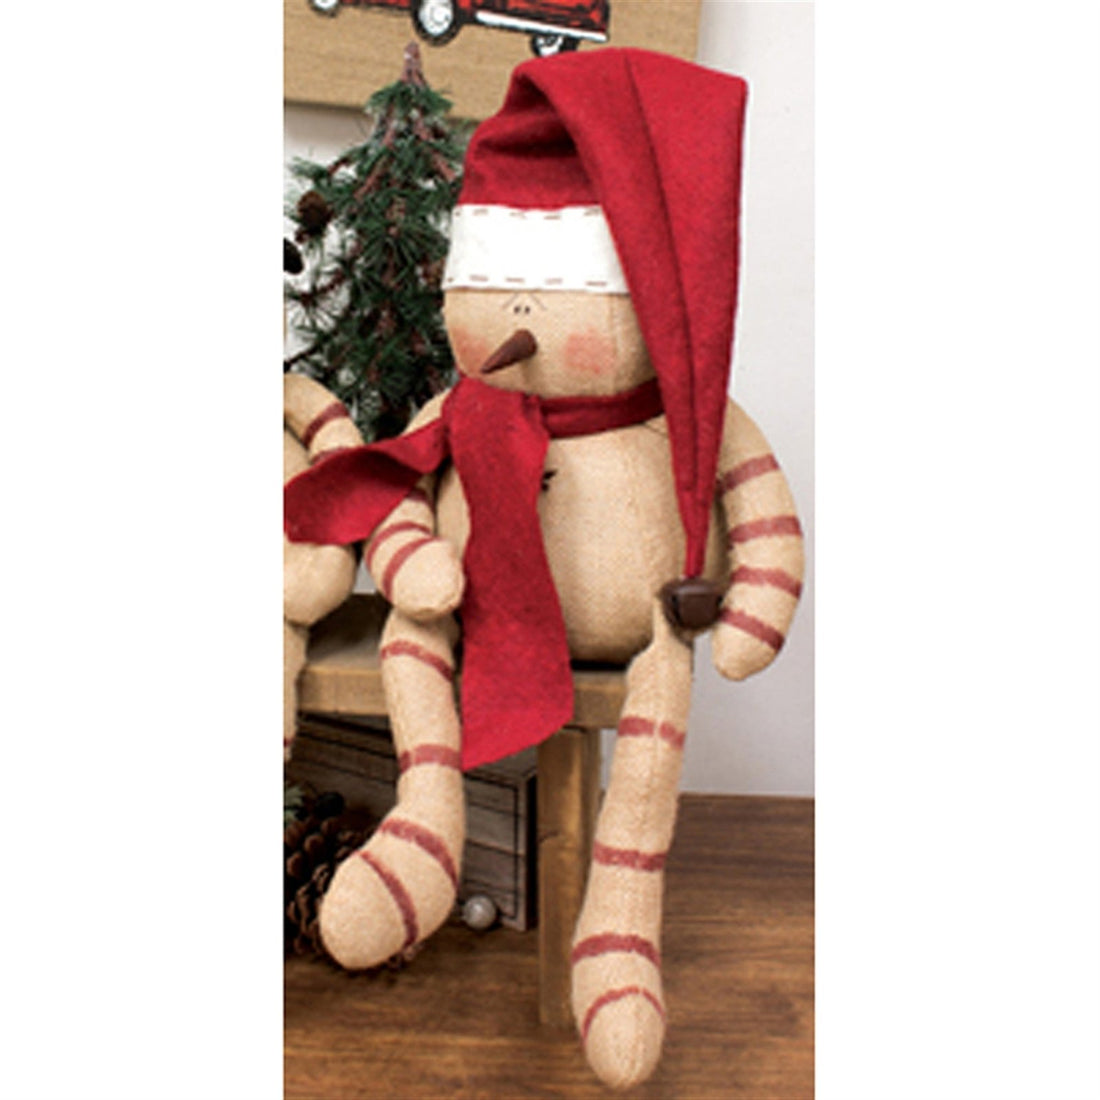 Christmas 15&quot; Candy Cane Snowman Doll w/ Santa stocking Cap - The Primitive Pineapple Collection